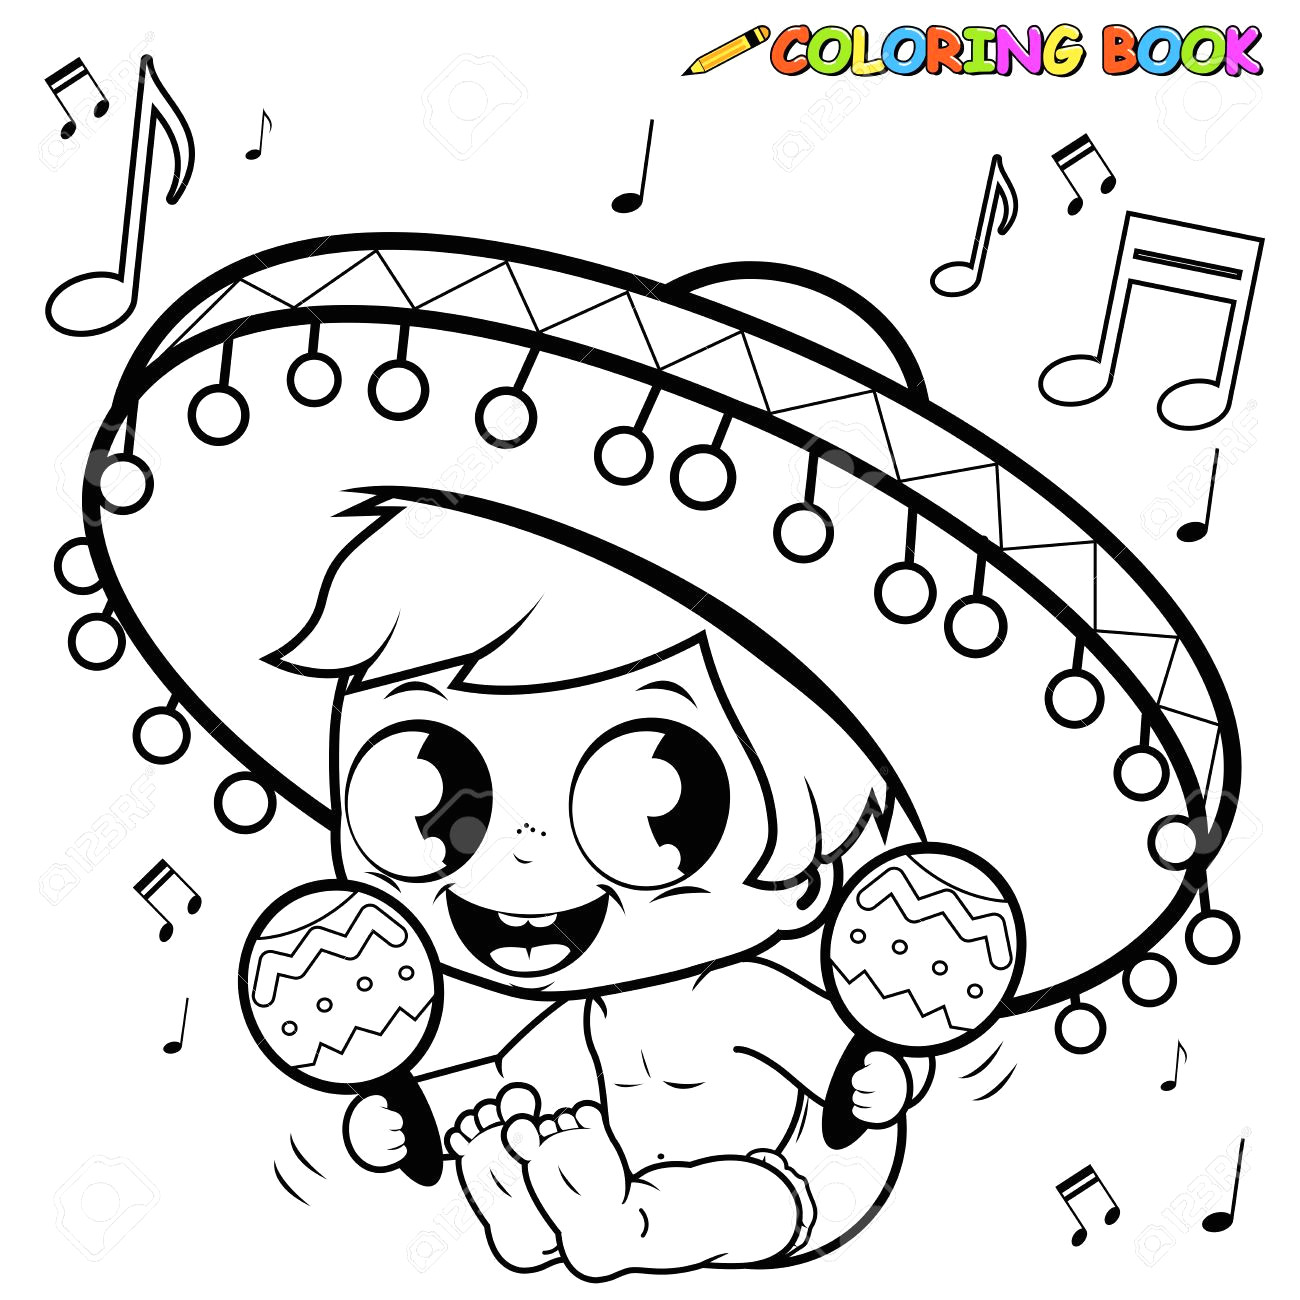 royalty free coloring pages unique elegant beautiful best 0d stock free vector stock s